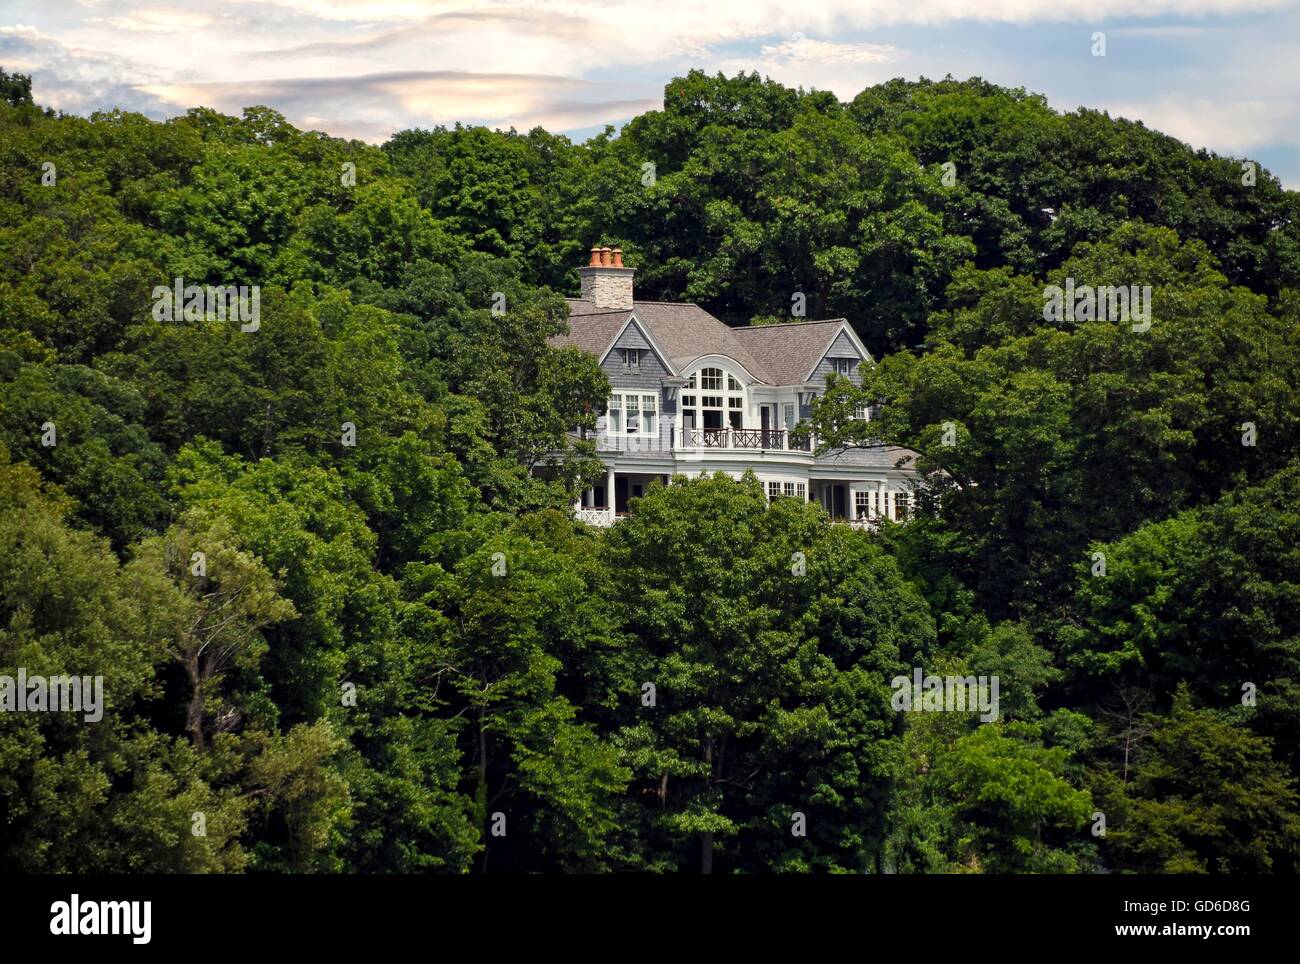 Luxury home in lush summer tree foliage on a hill. Stock Photo